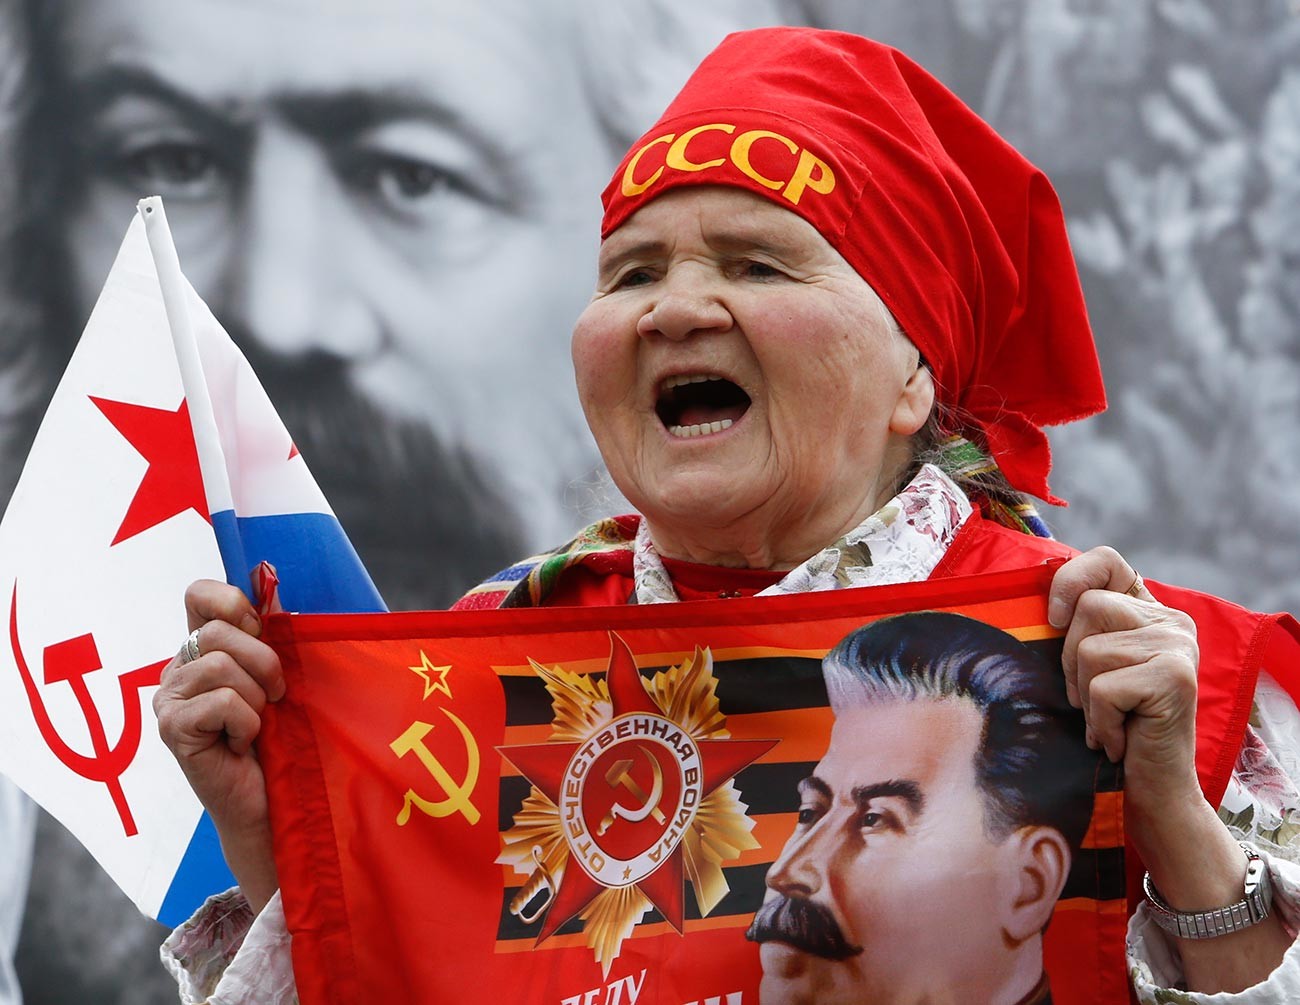 Supporter of Communist party shouts slogans during May Day rally in Moscow.